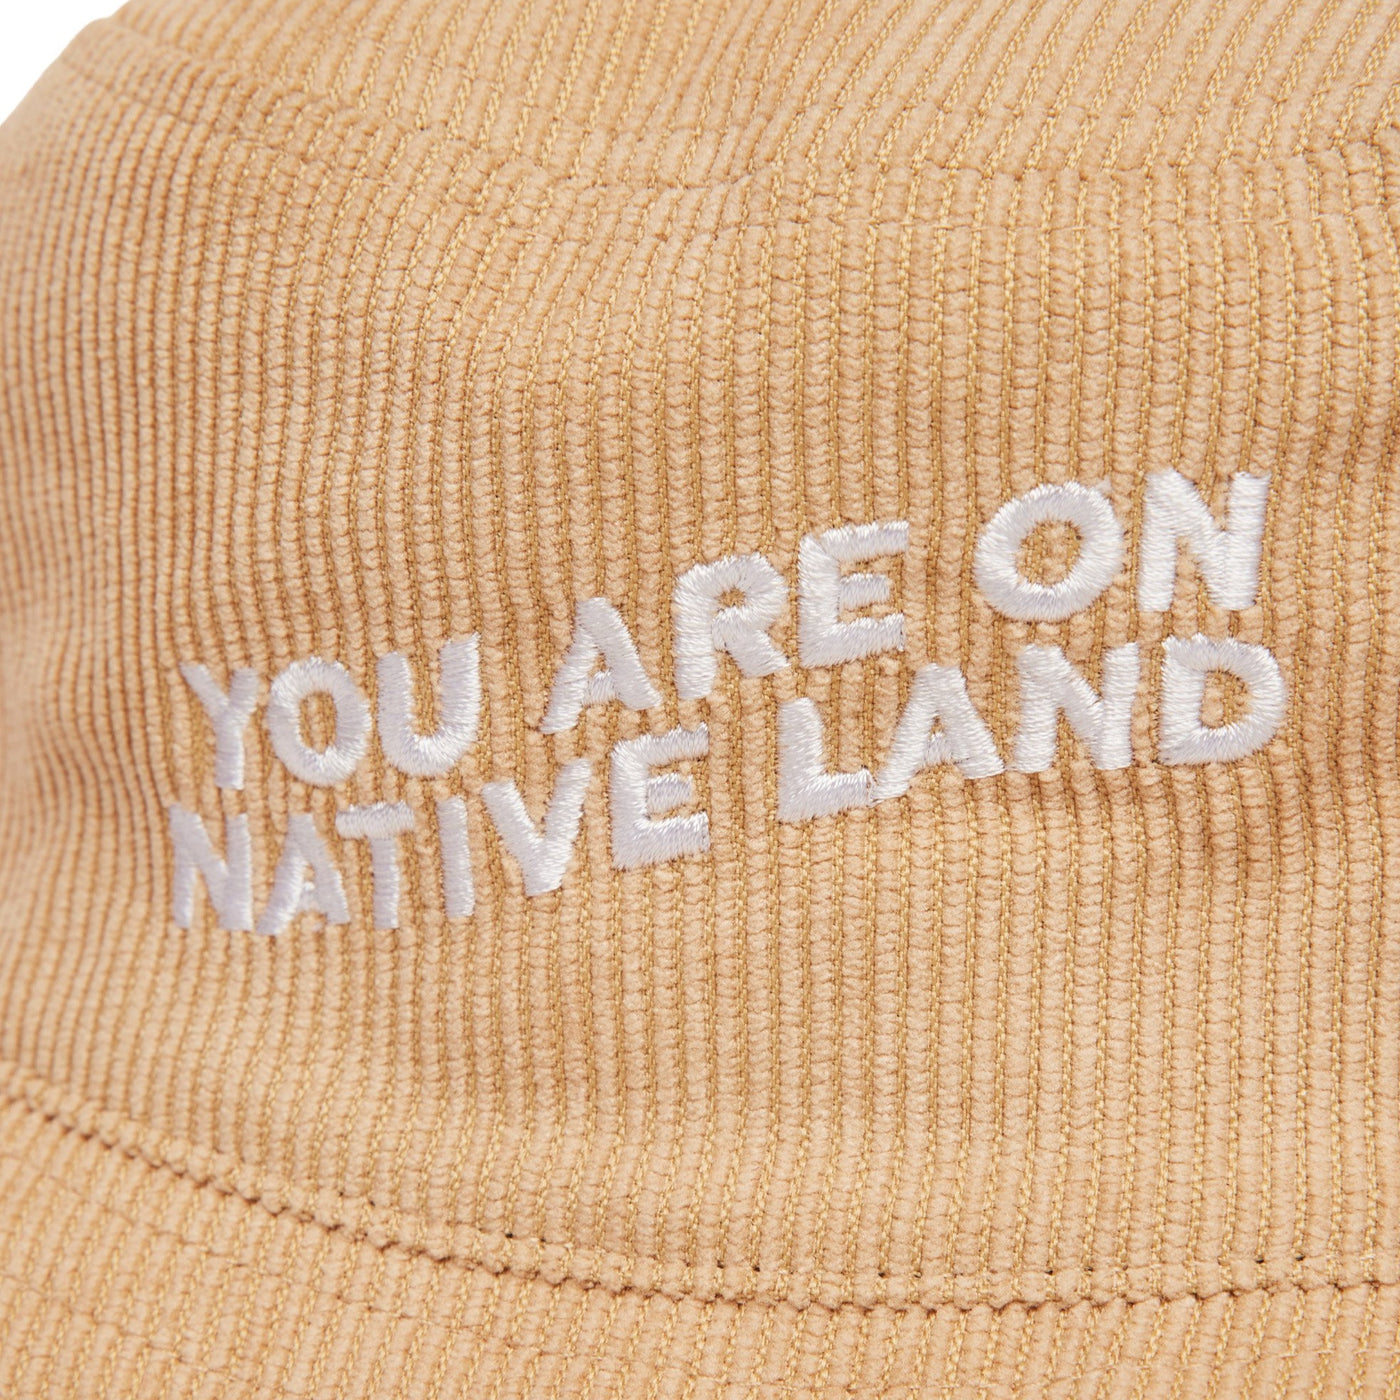 'YOU ARE ON NATIVE LAND' CORDUROY BUCKET HAT - TAN